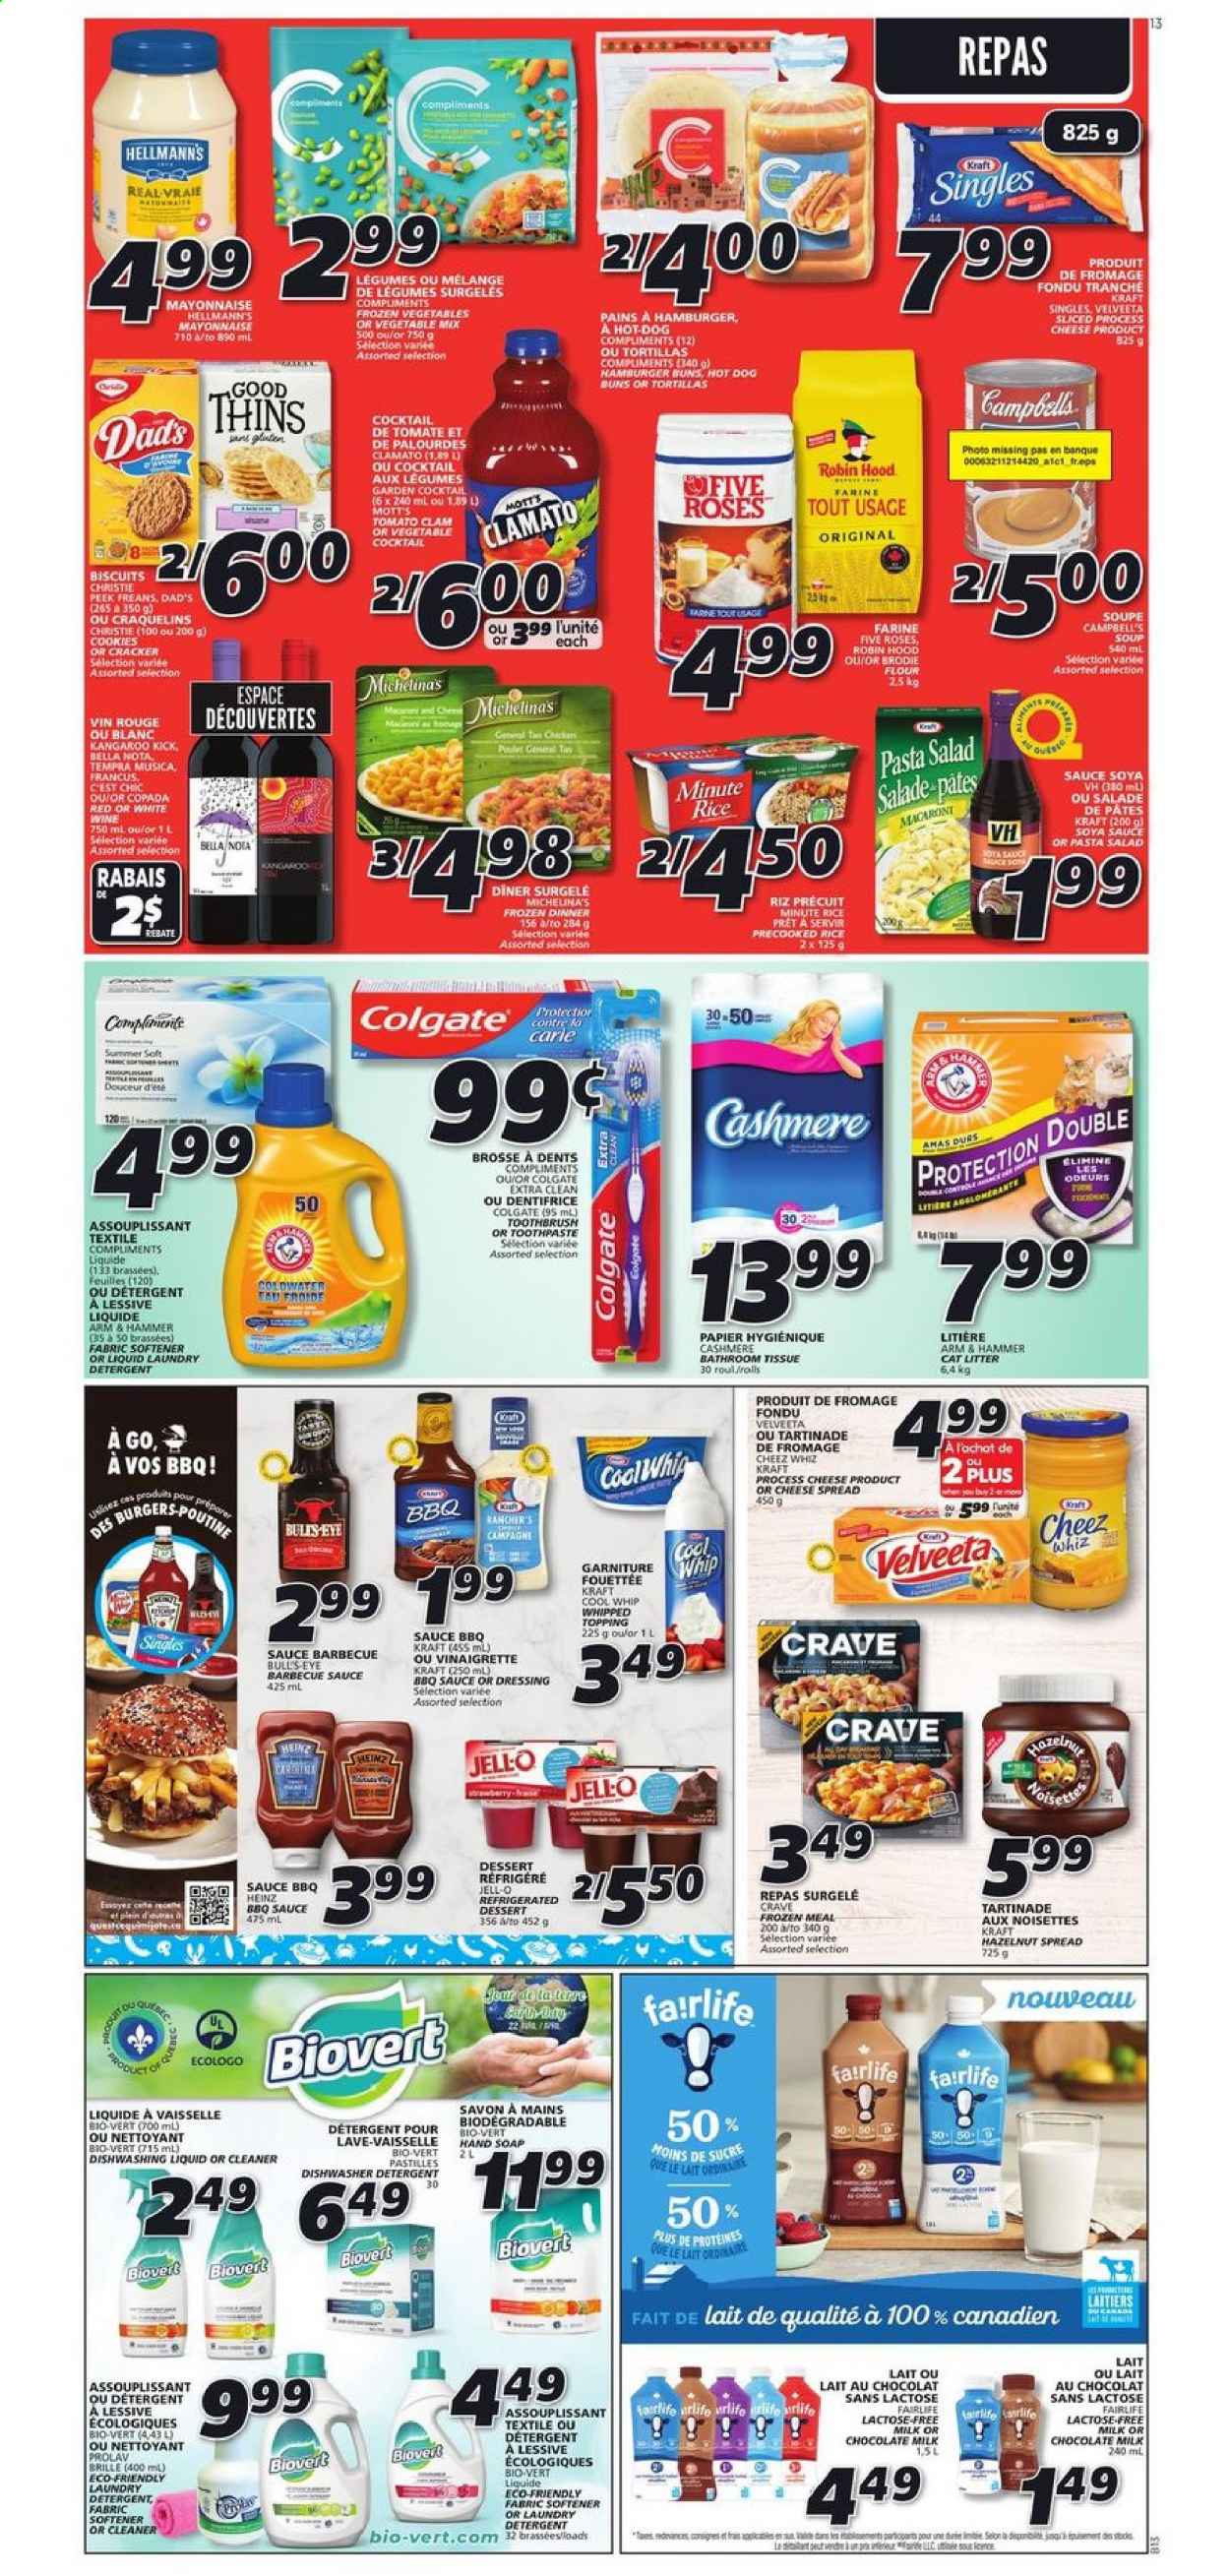 thumbnail - IGA Flyer - April 22, 2021 - April 28, 2021 - Sales products - tortillas, buns, burger buns, Bella, salad, Mott's, clams, soup, Kraft®, ham, cheese spread, pasta salad, milk, Cool Whip, mayonnaise, Hellmann’s, frozen vegetables, cookies, milk chocolate, chocolate, crackers, biscuit, pastilles, Thins, ARM & HAMMER, topping, Jell-O, Heinz, rice, BBQ sauce, soy sauce, vinaigrette dressing, dressing, hazelnut spread, Clamato. Page 11.